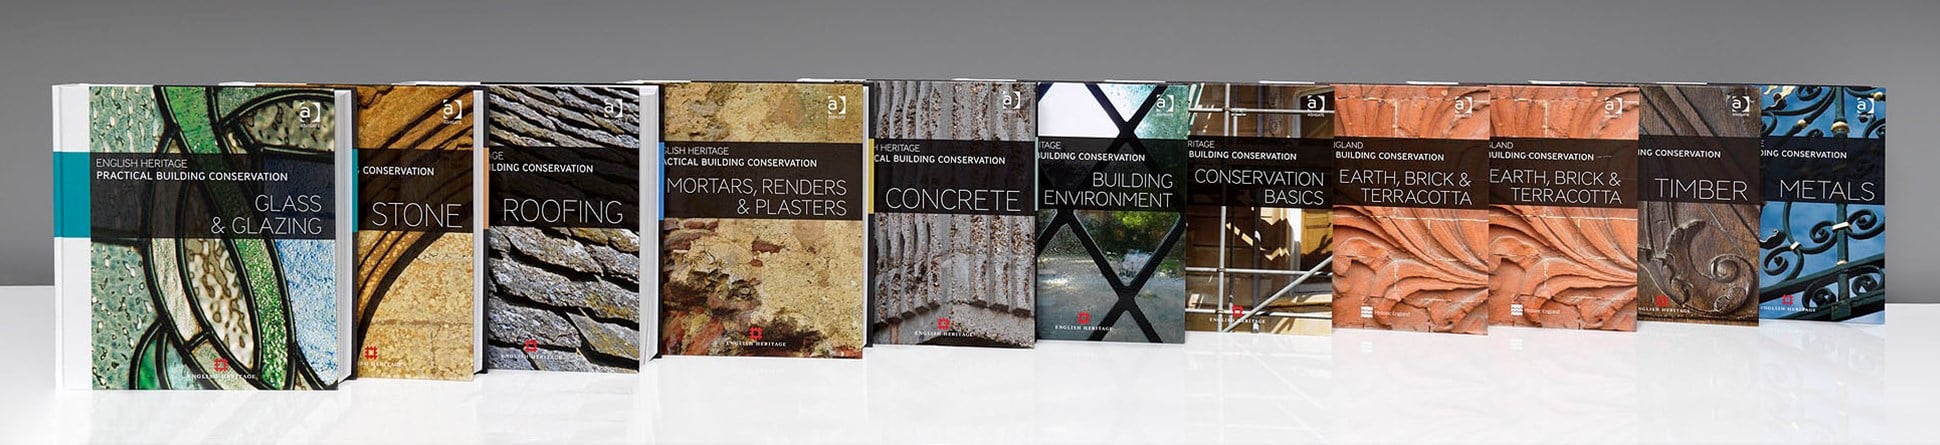 Image of the Practical Building Conservation series of books